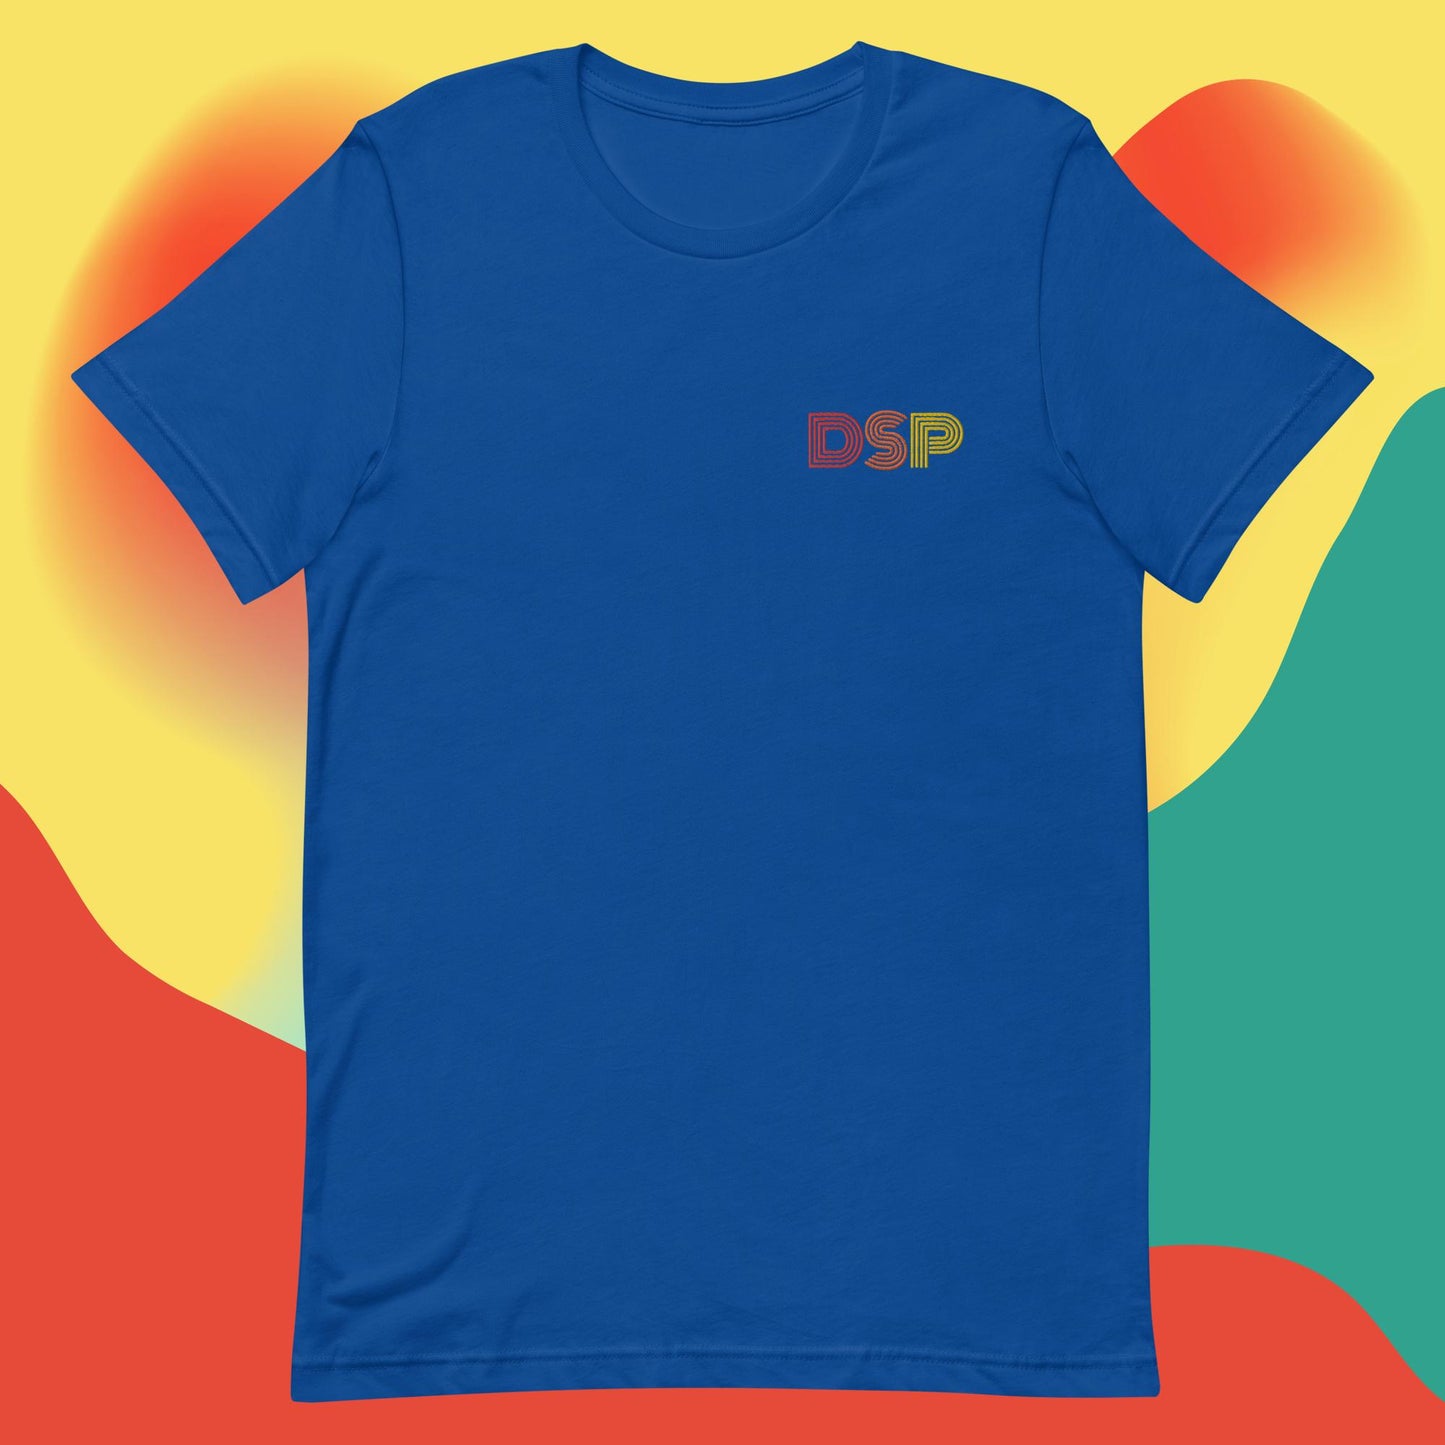 DSP T-shirt - Embroidered